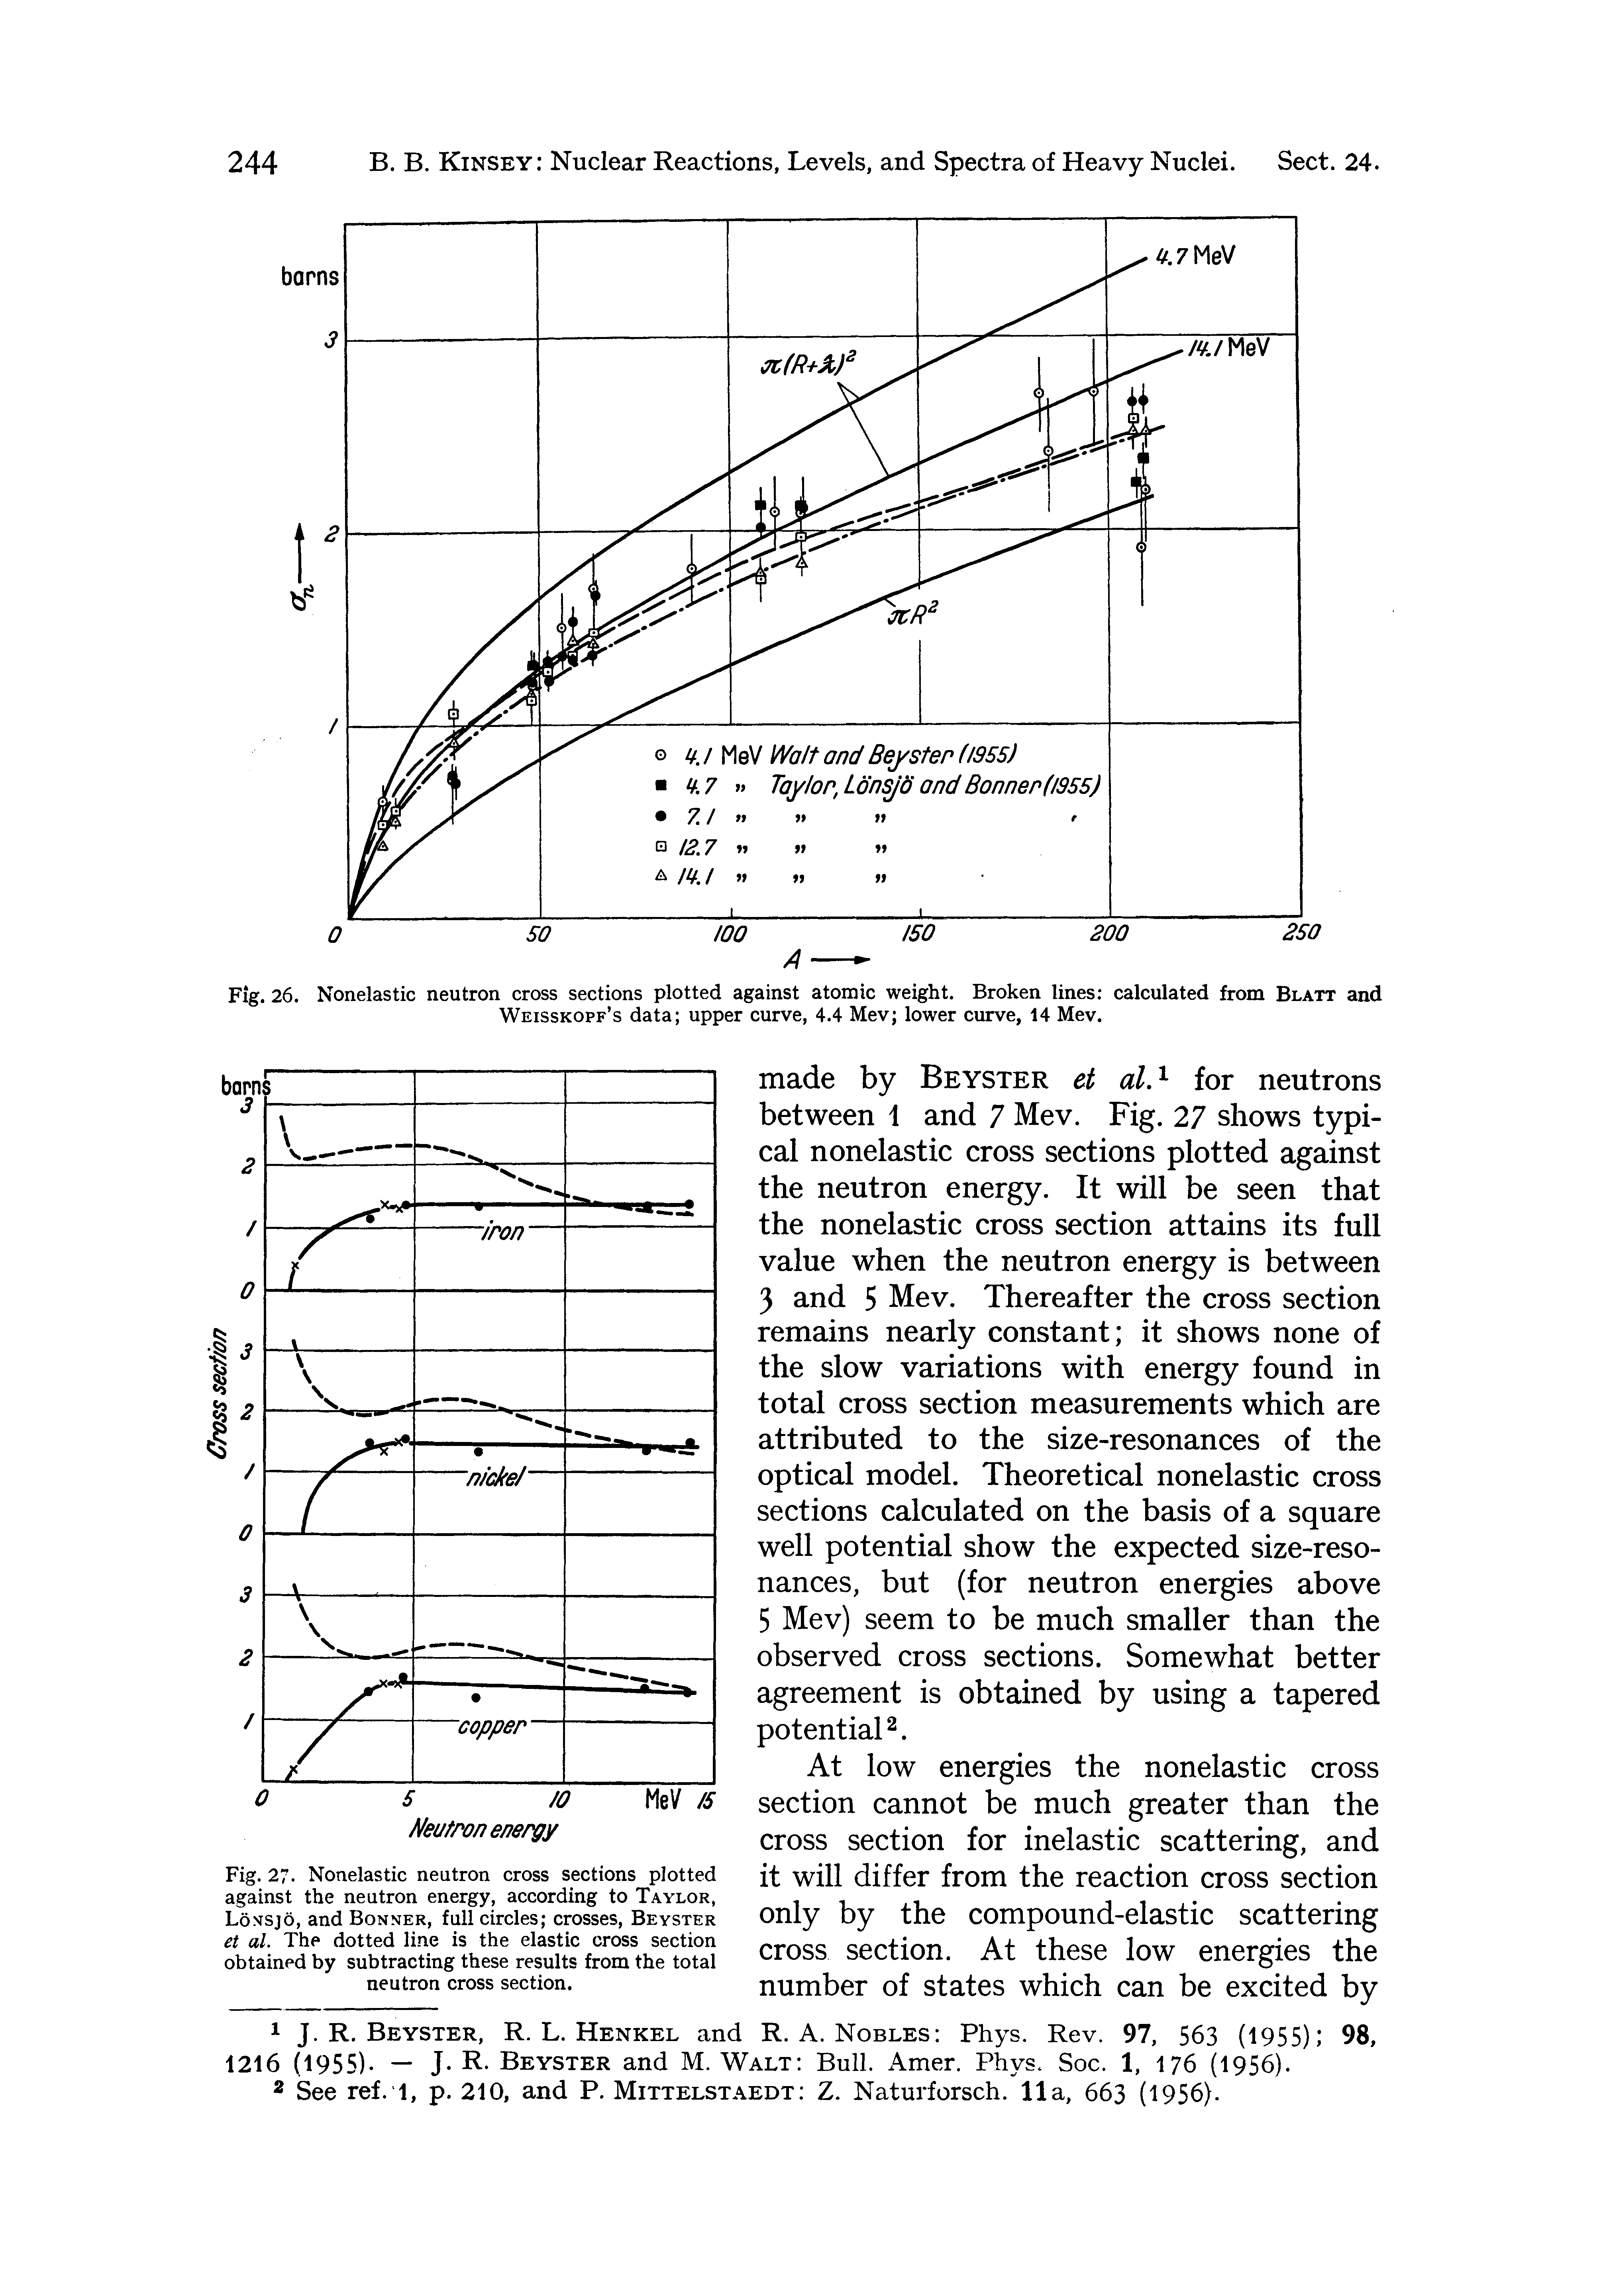 Fig. 27. Nonelastic neutron cross sections plotted against the neutron energy, according to Taylor, Lo.vsjd, and Bonner, full circles crosses, Beyster et al. The dotted line is the elastic cross section obtained by subtracting these results from the total neutron cross section.